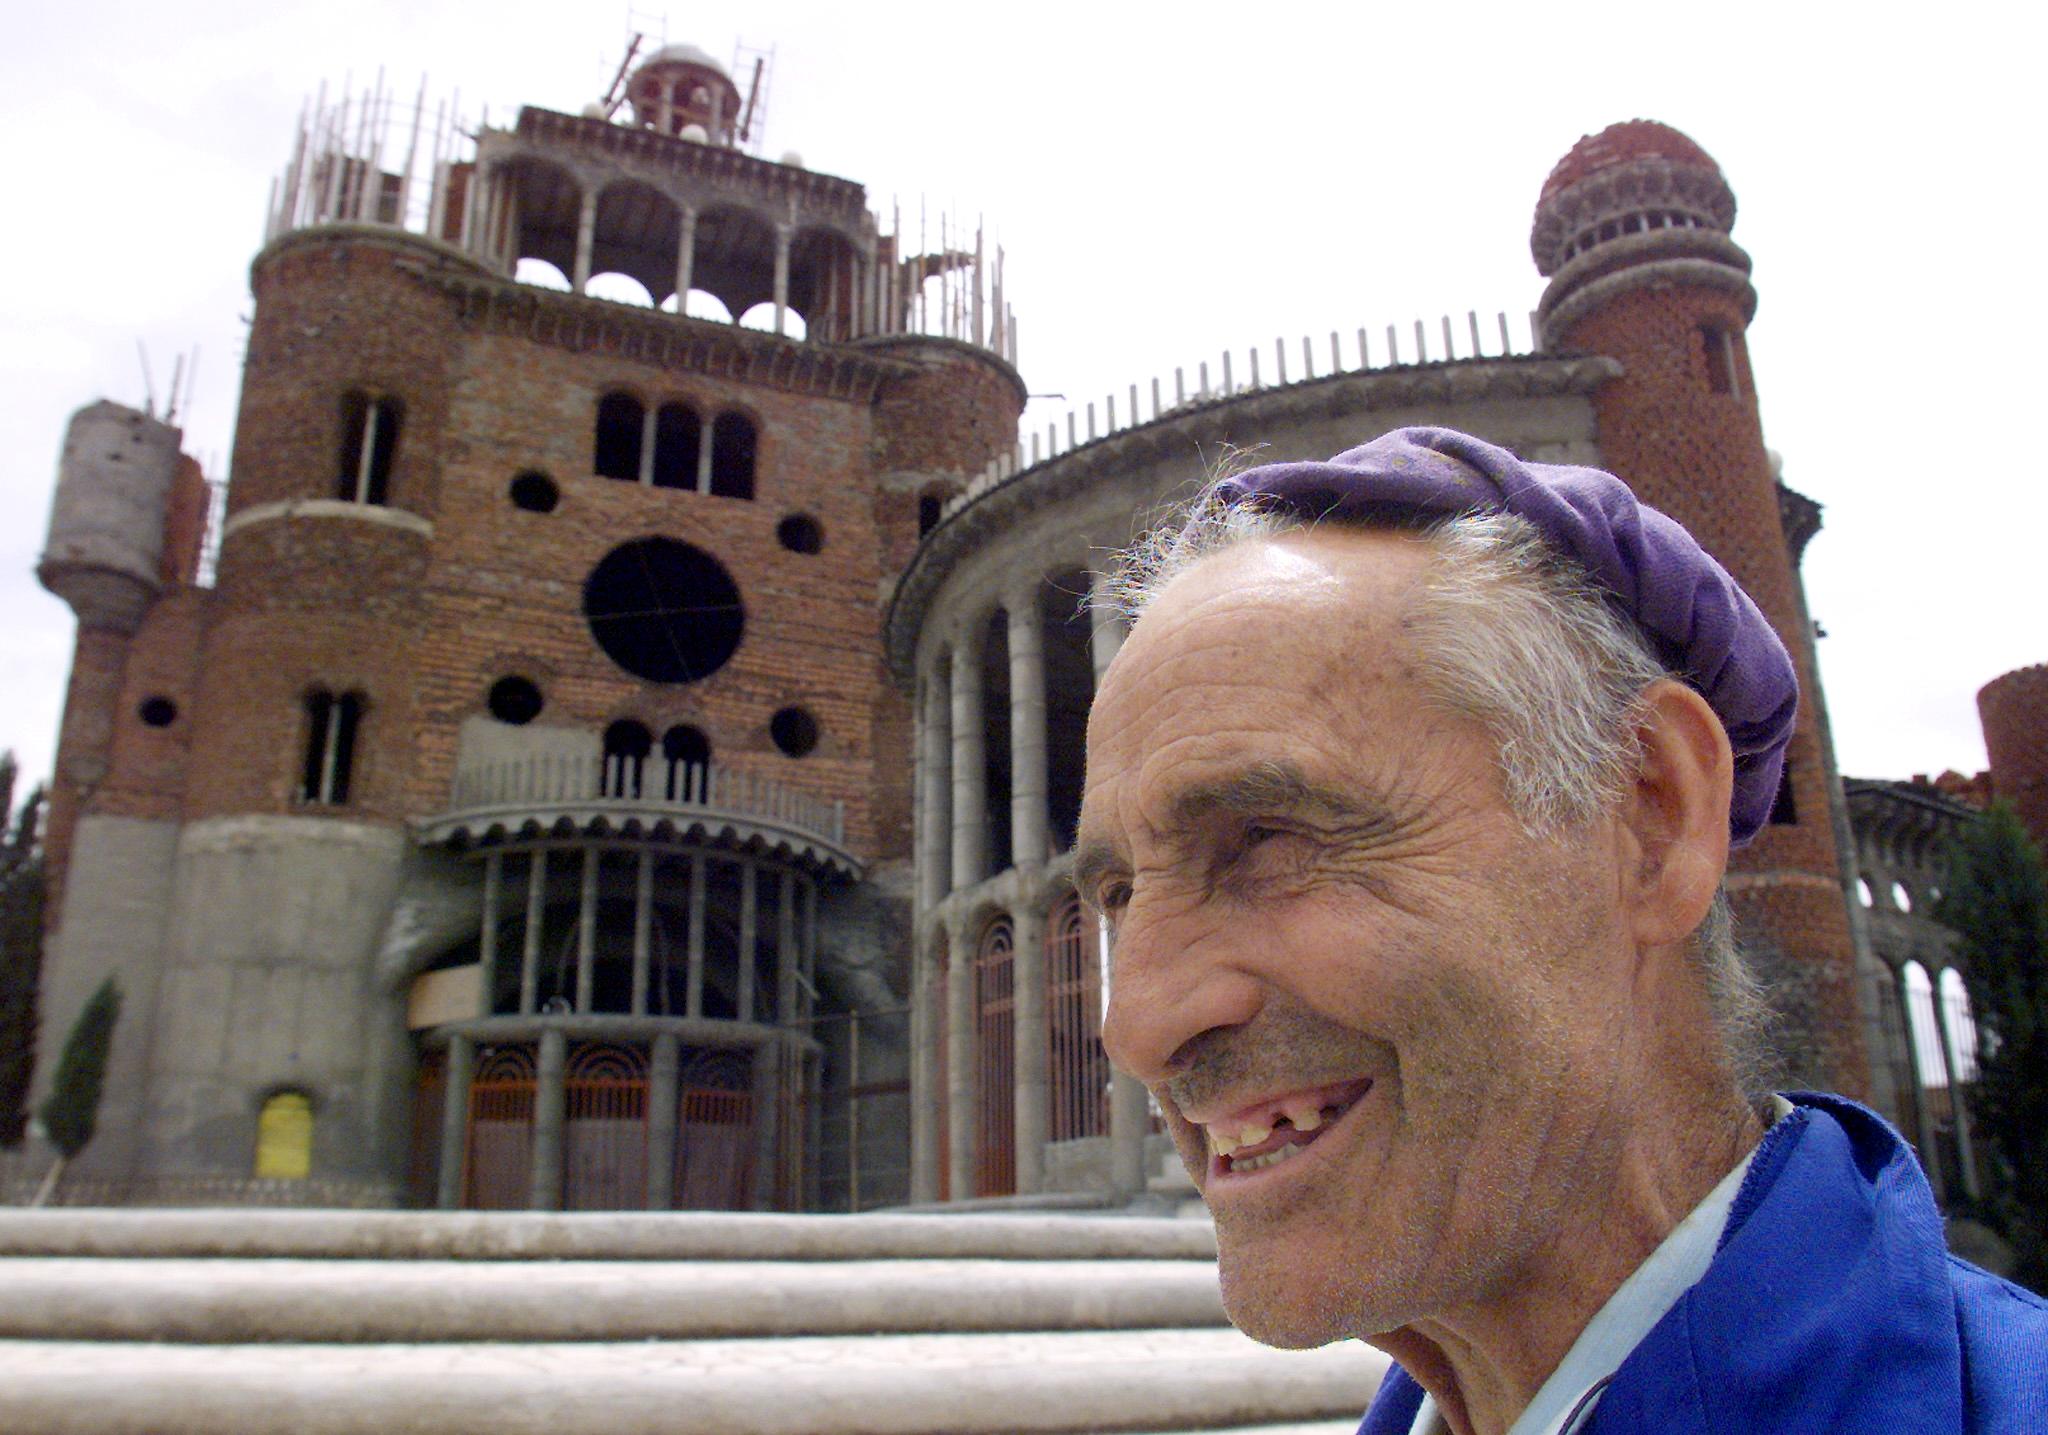 'Scrap cathedral' in Spain lives on after originator's death